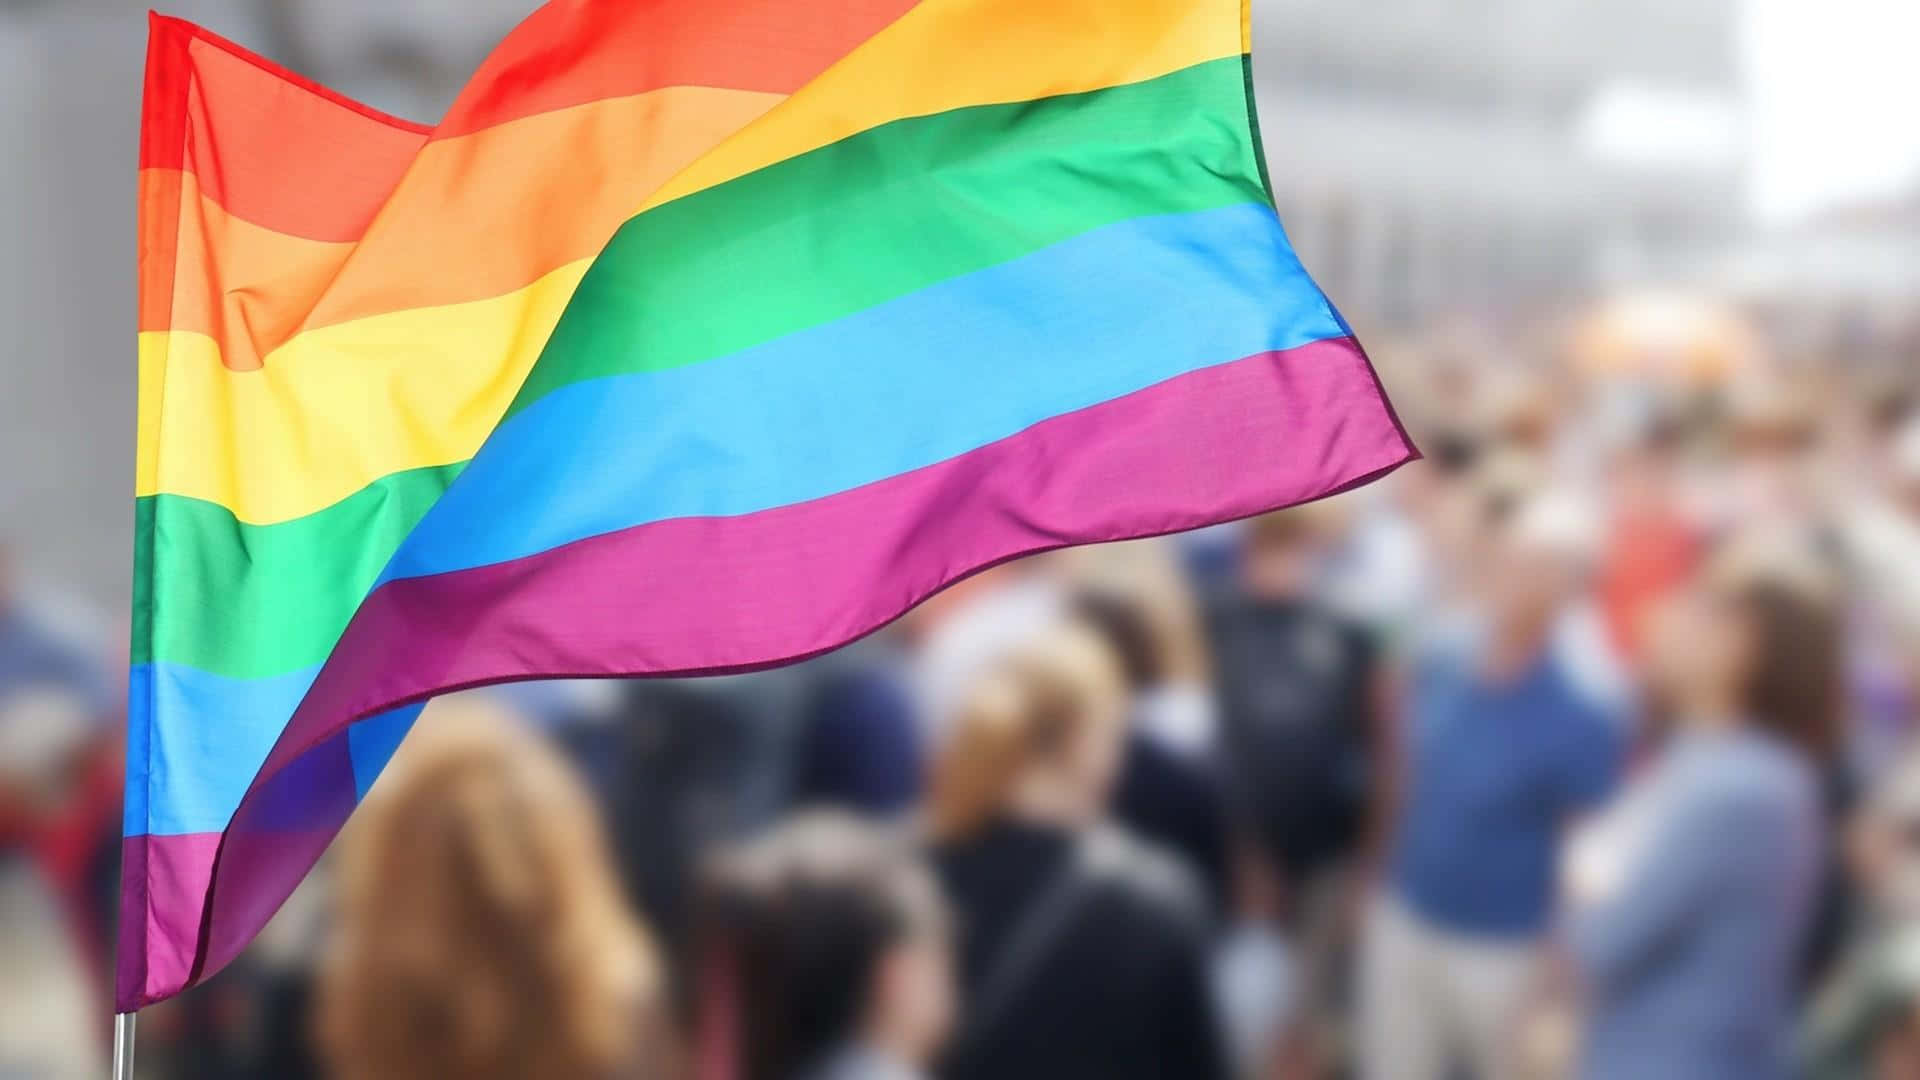 Celebrating Pride and the LGBT Rainbow Flag Wallpaper